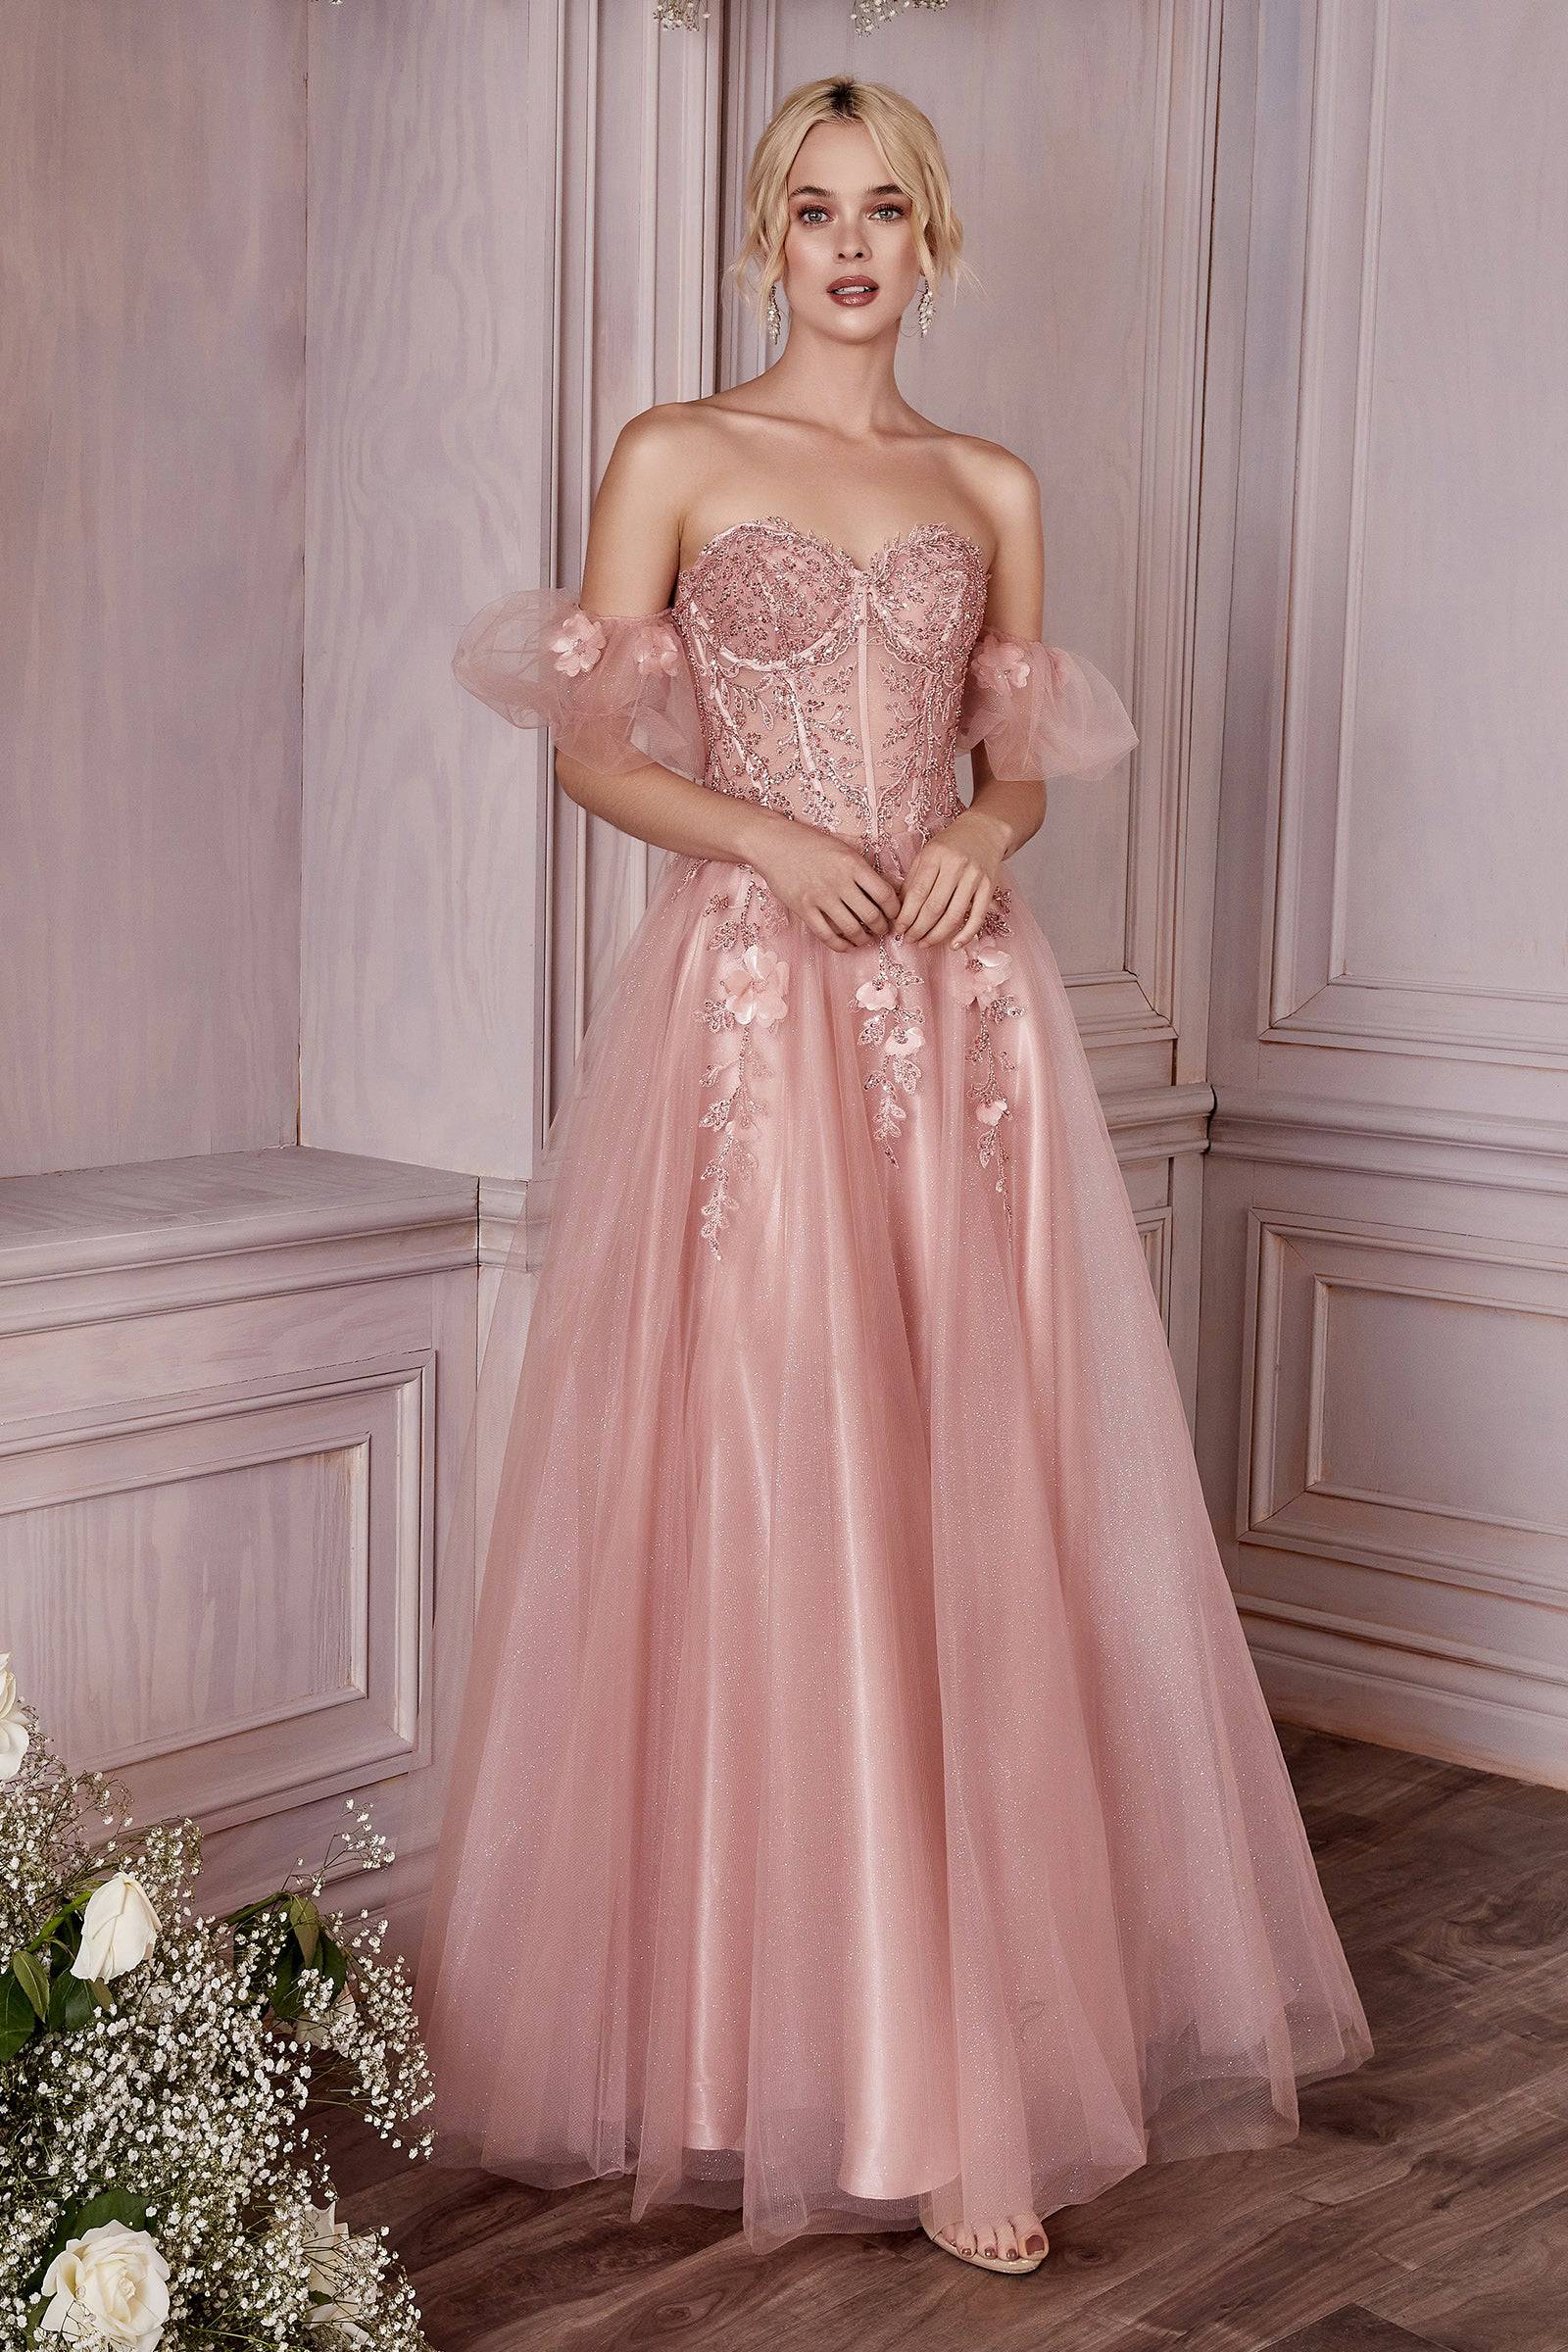 Andrea & Leo Couture CM347 Size 2 Pink Sheer Lace Sequin Ballgown Prom  Dress Corset A Line Gown